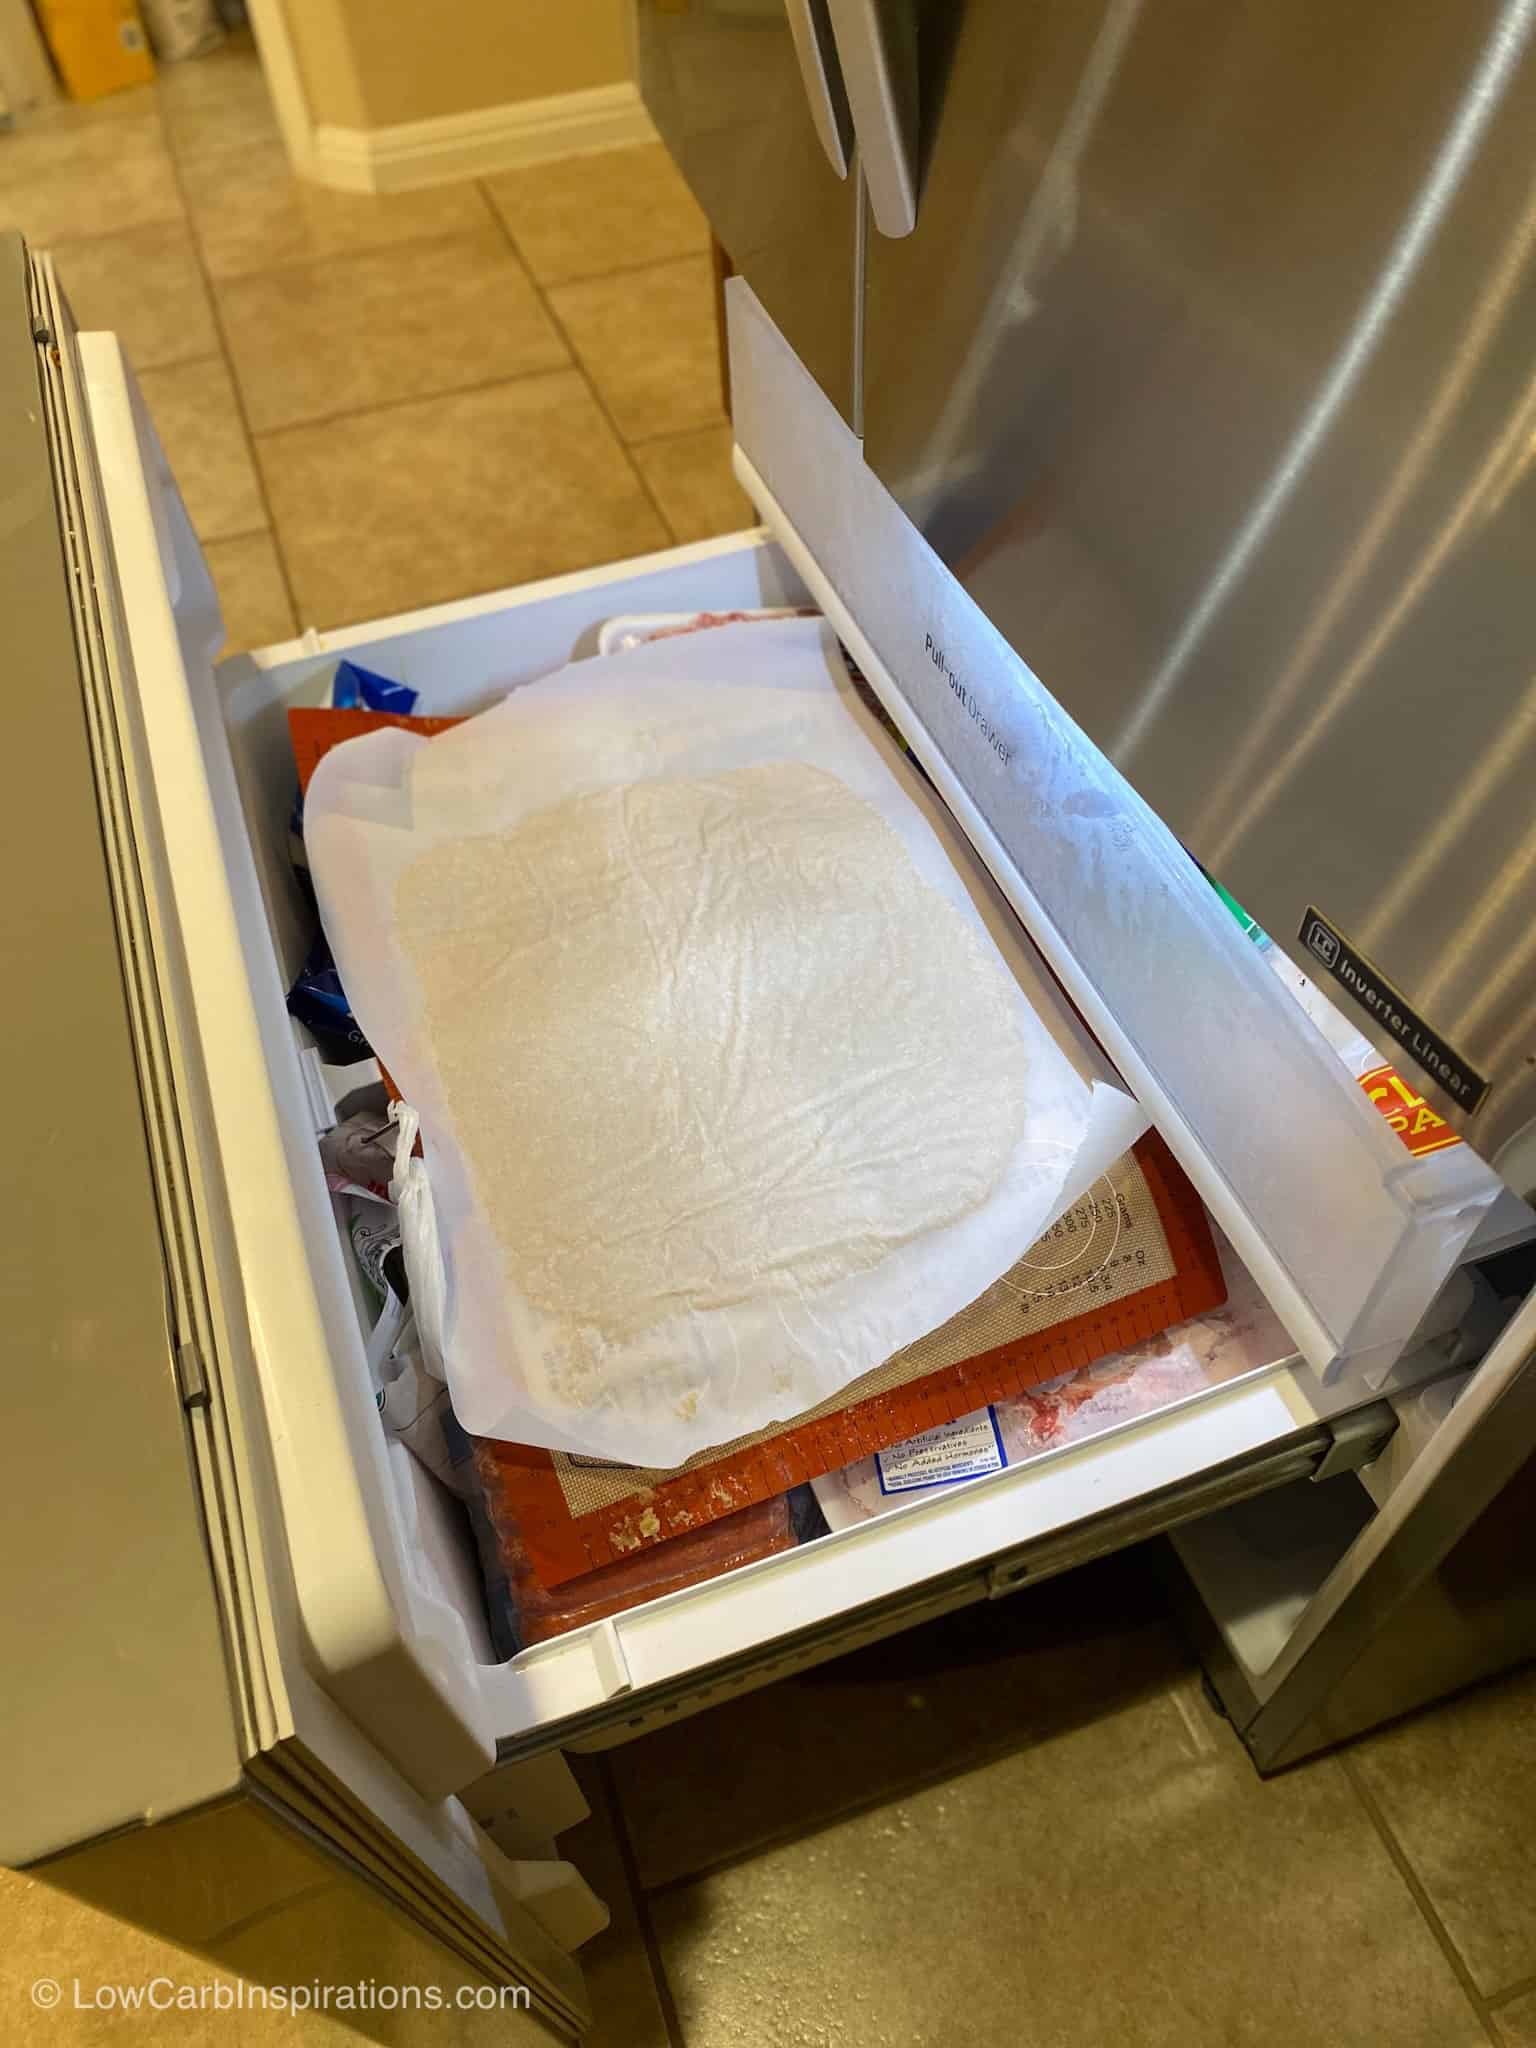 Dough being placed in the freezer to firm up